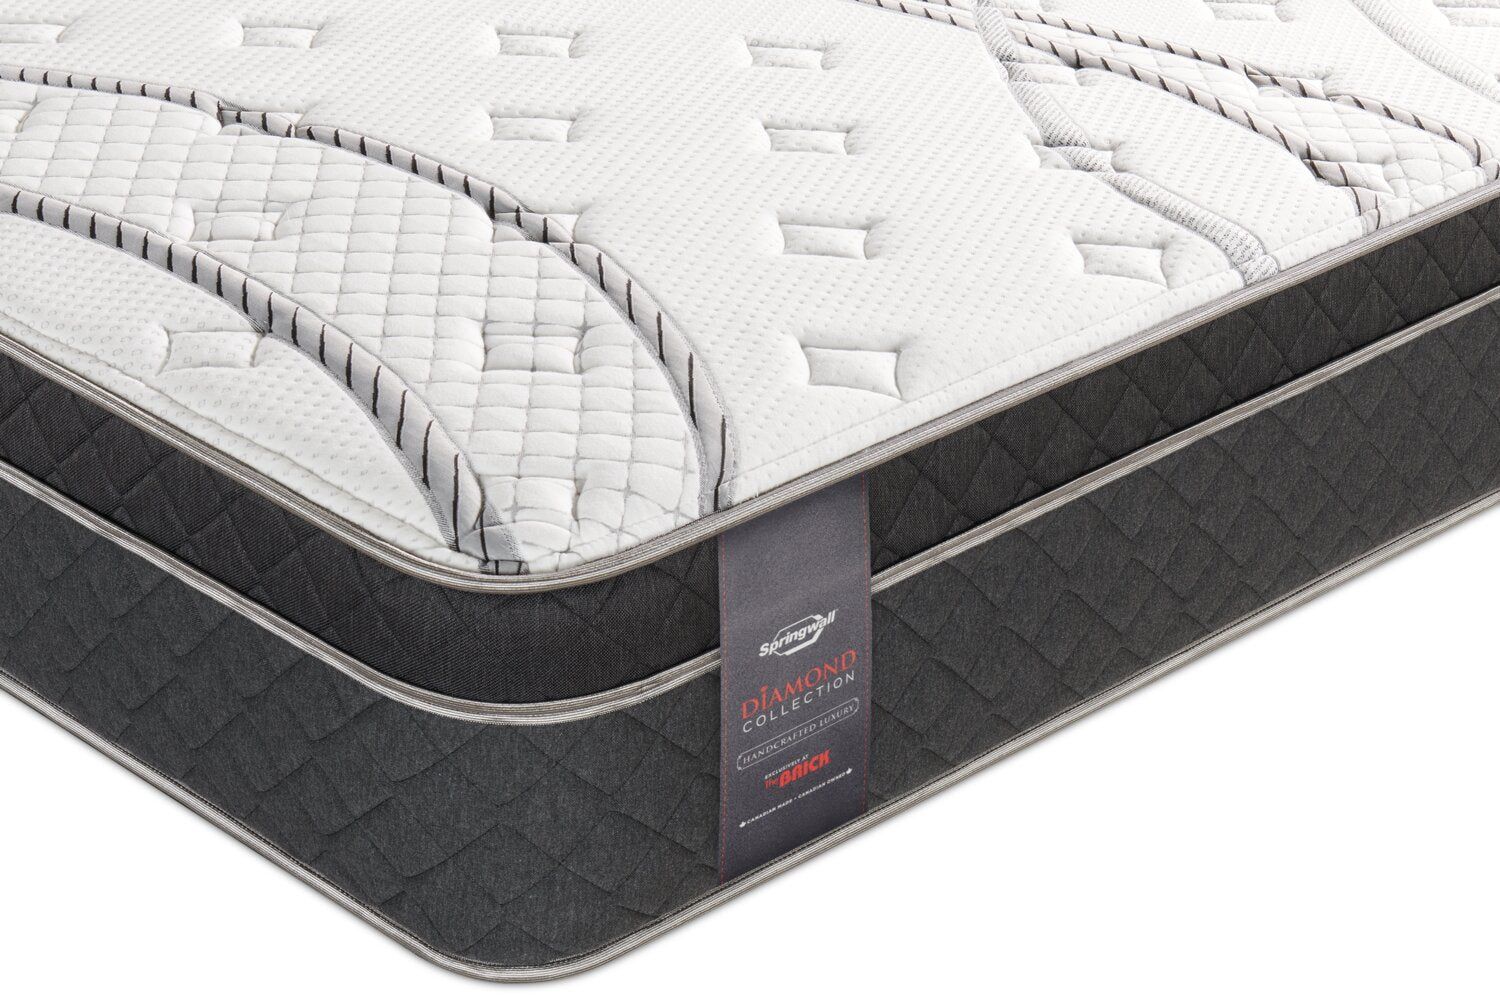 Shop Great Deals on King Size Mattresses, The Brick